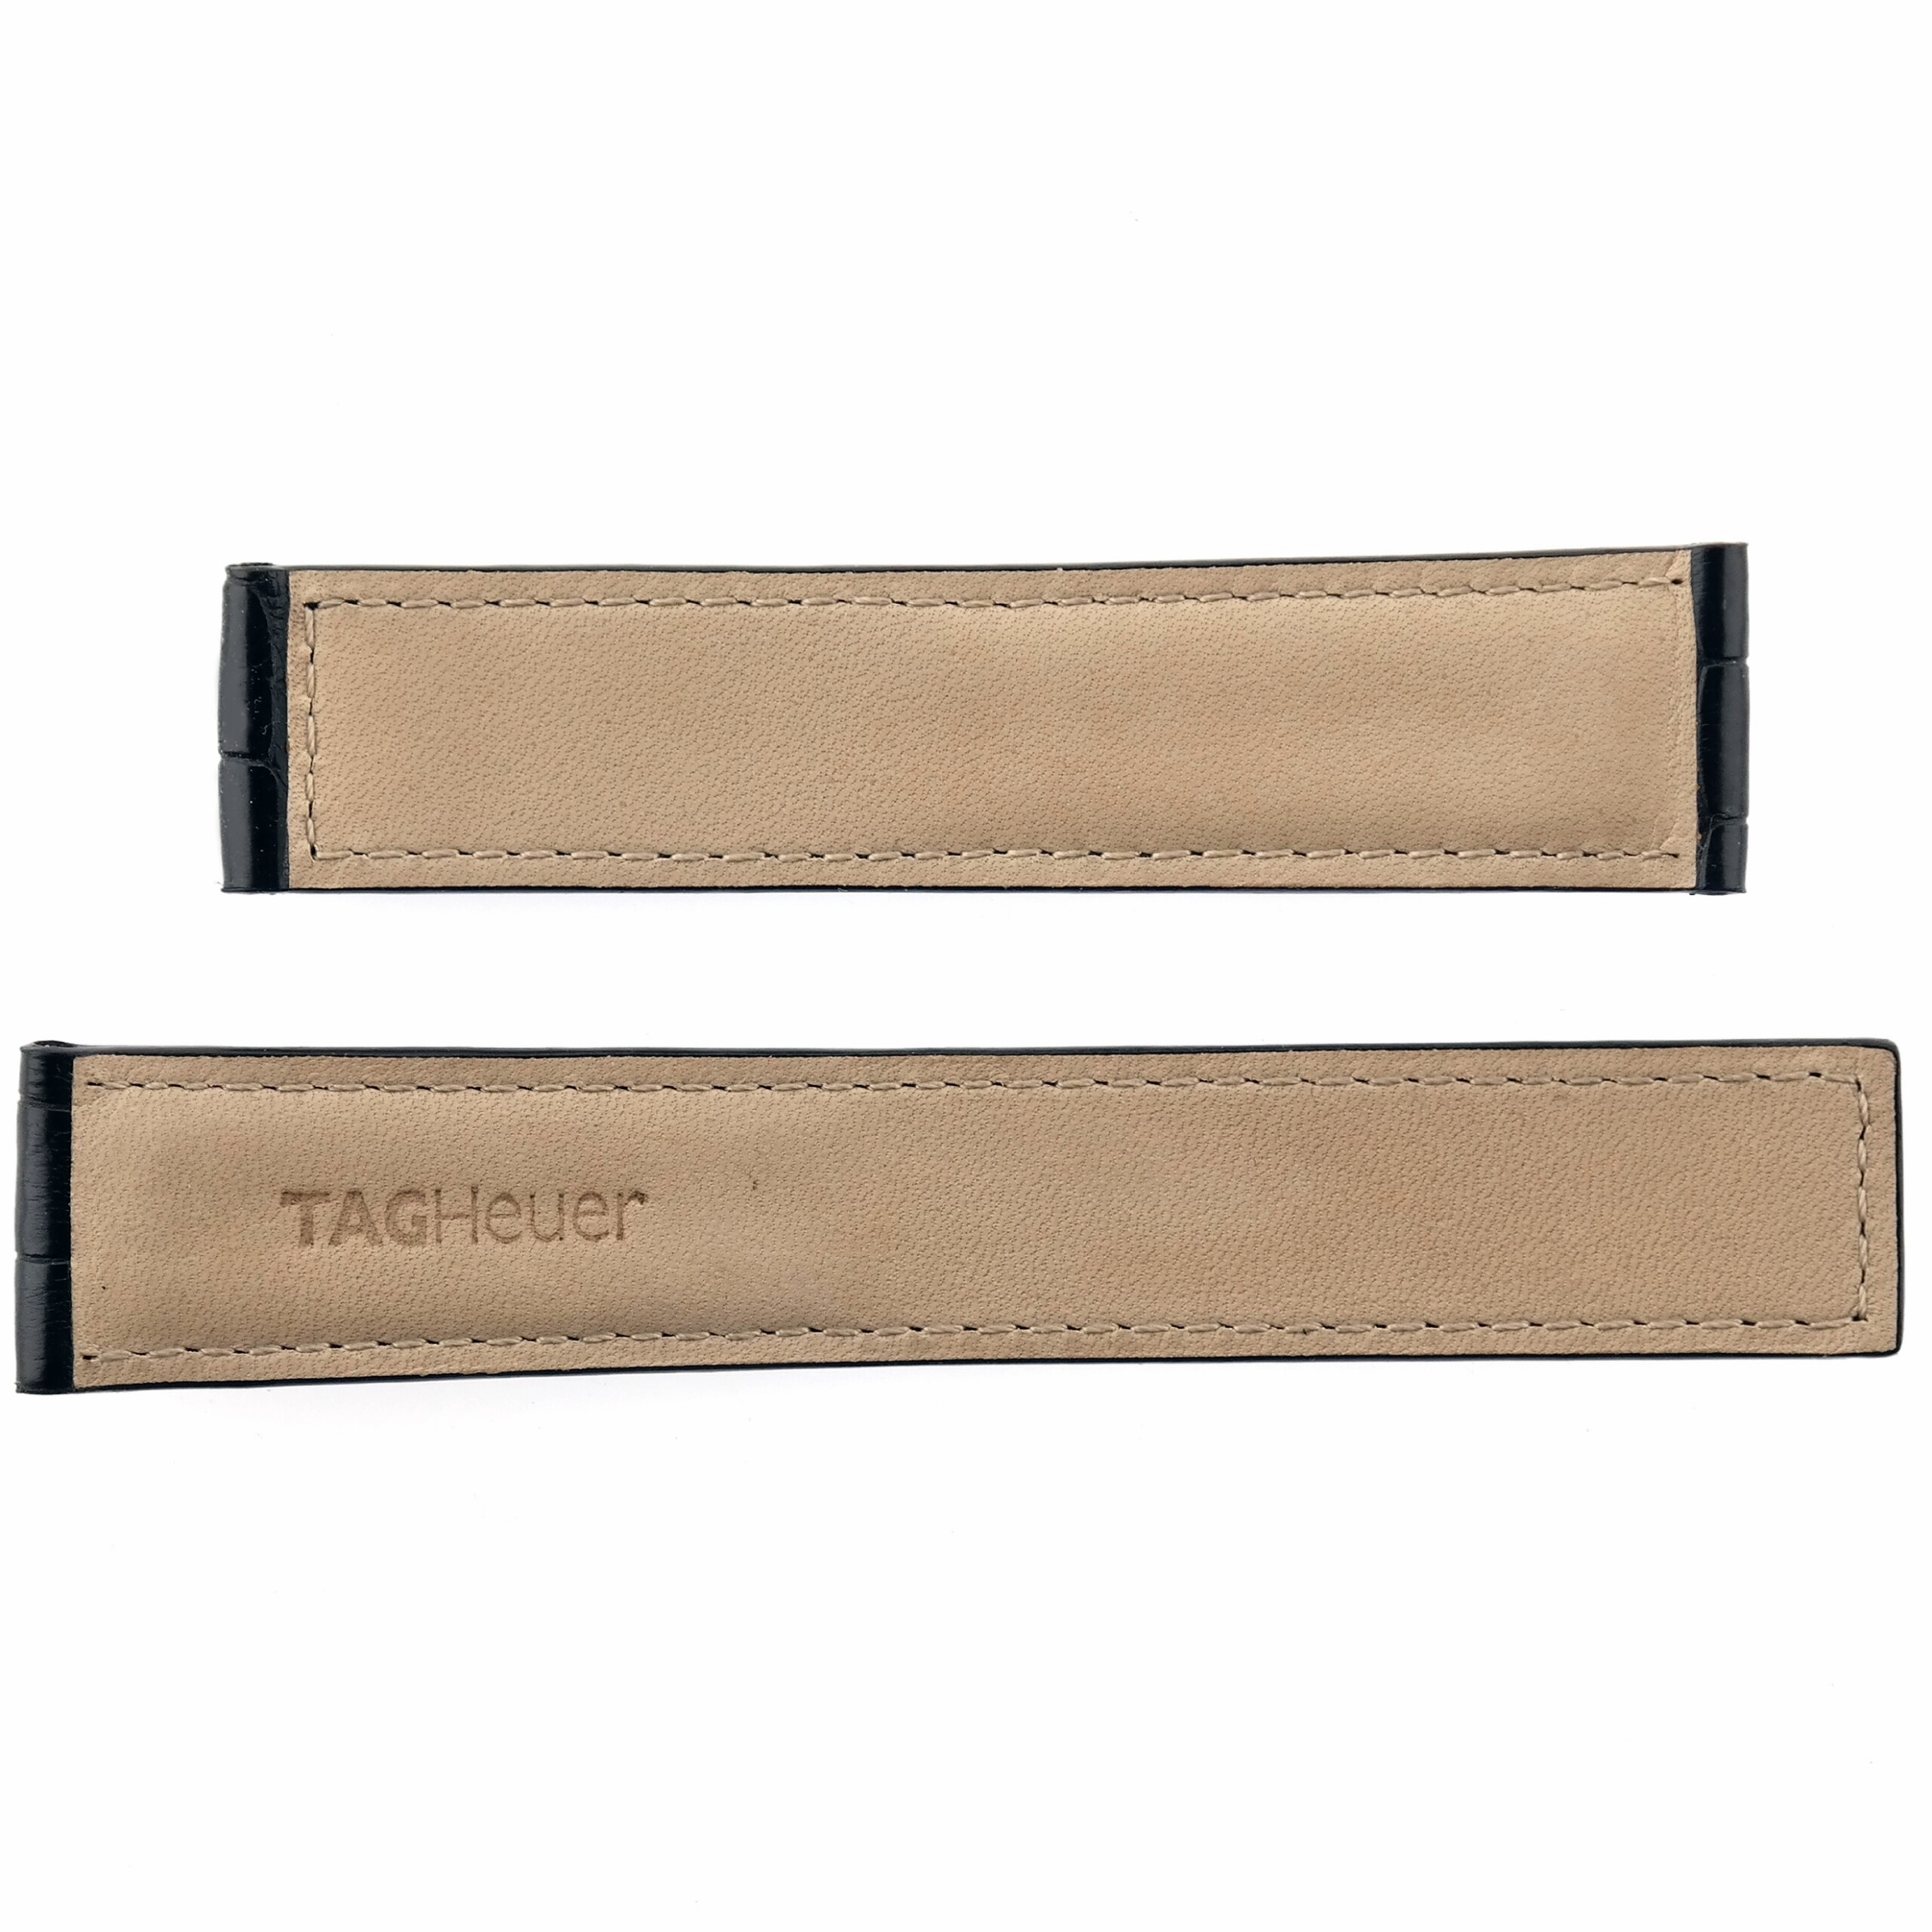 Authentic TAG Heuer Carrera Watch Strap - 20 mm